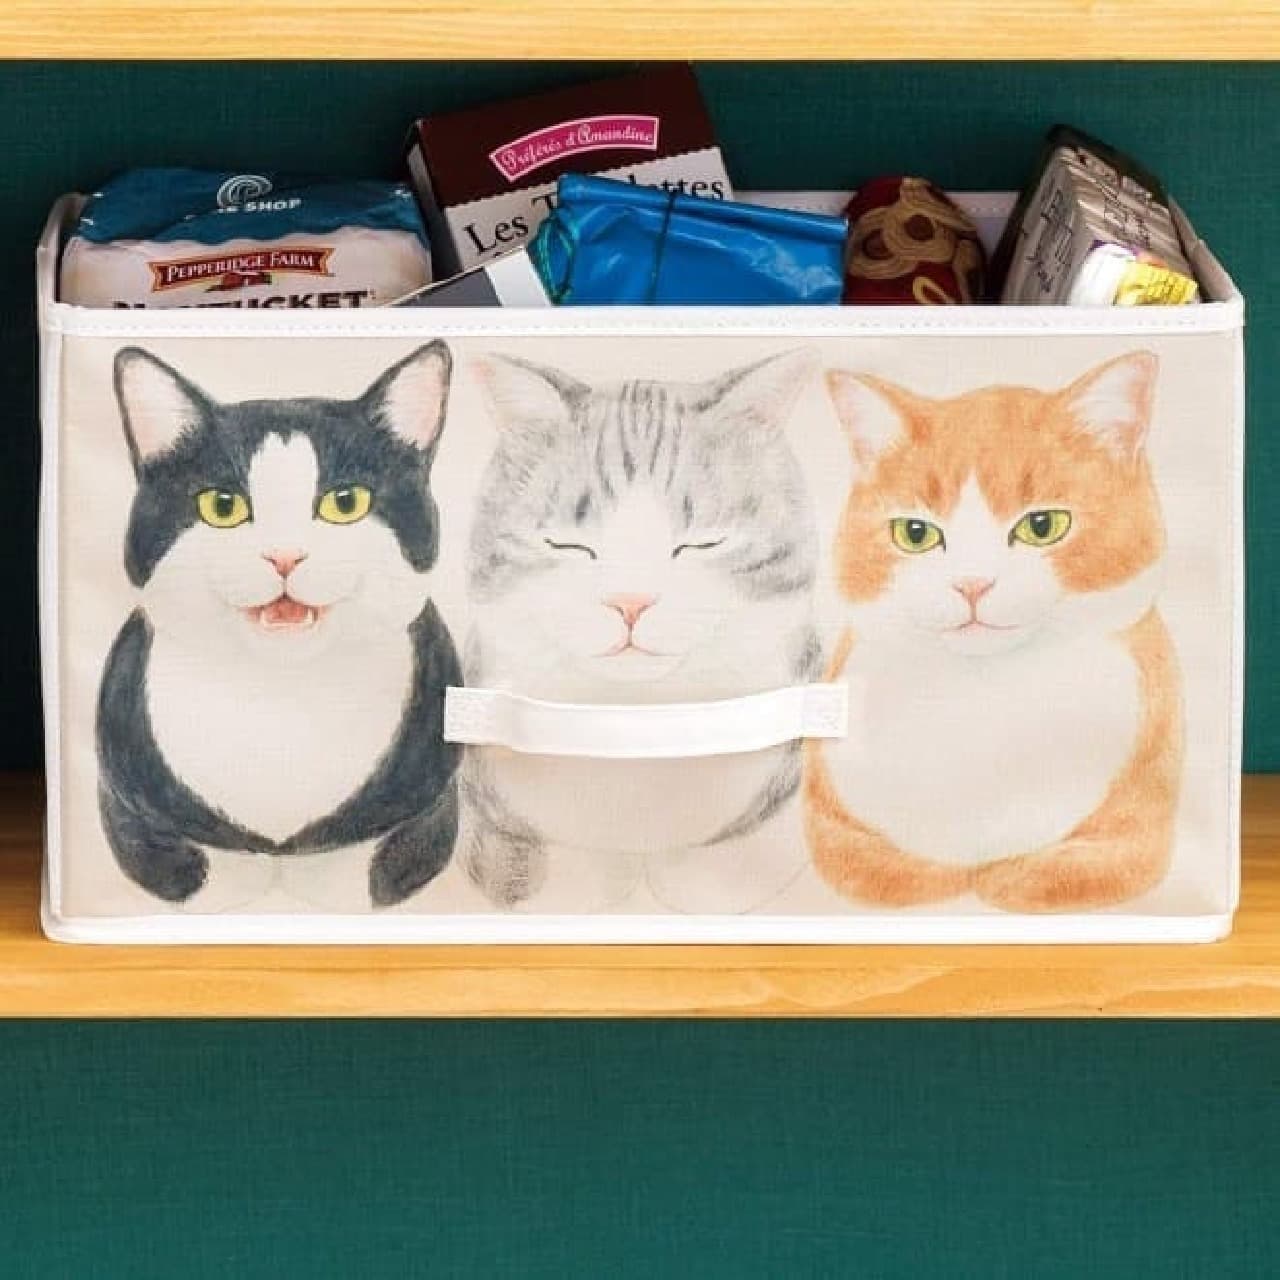 "Catloaf sitting cat storage box", Felissimo YOU + MORE! from